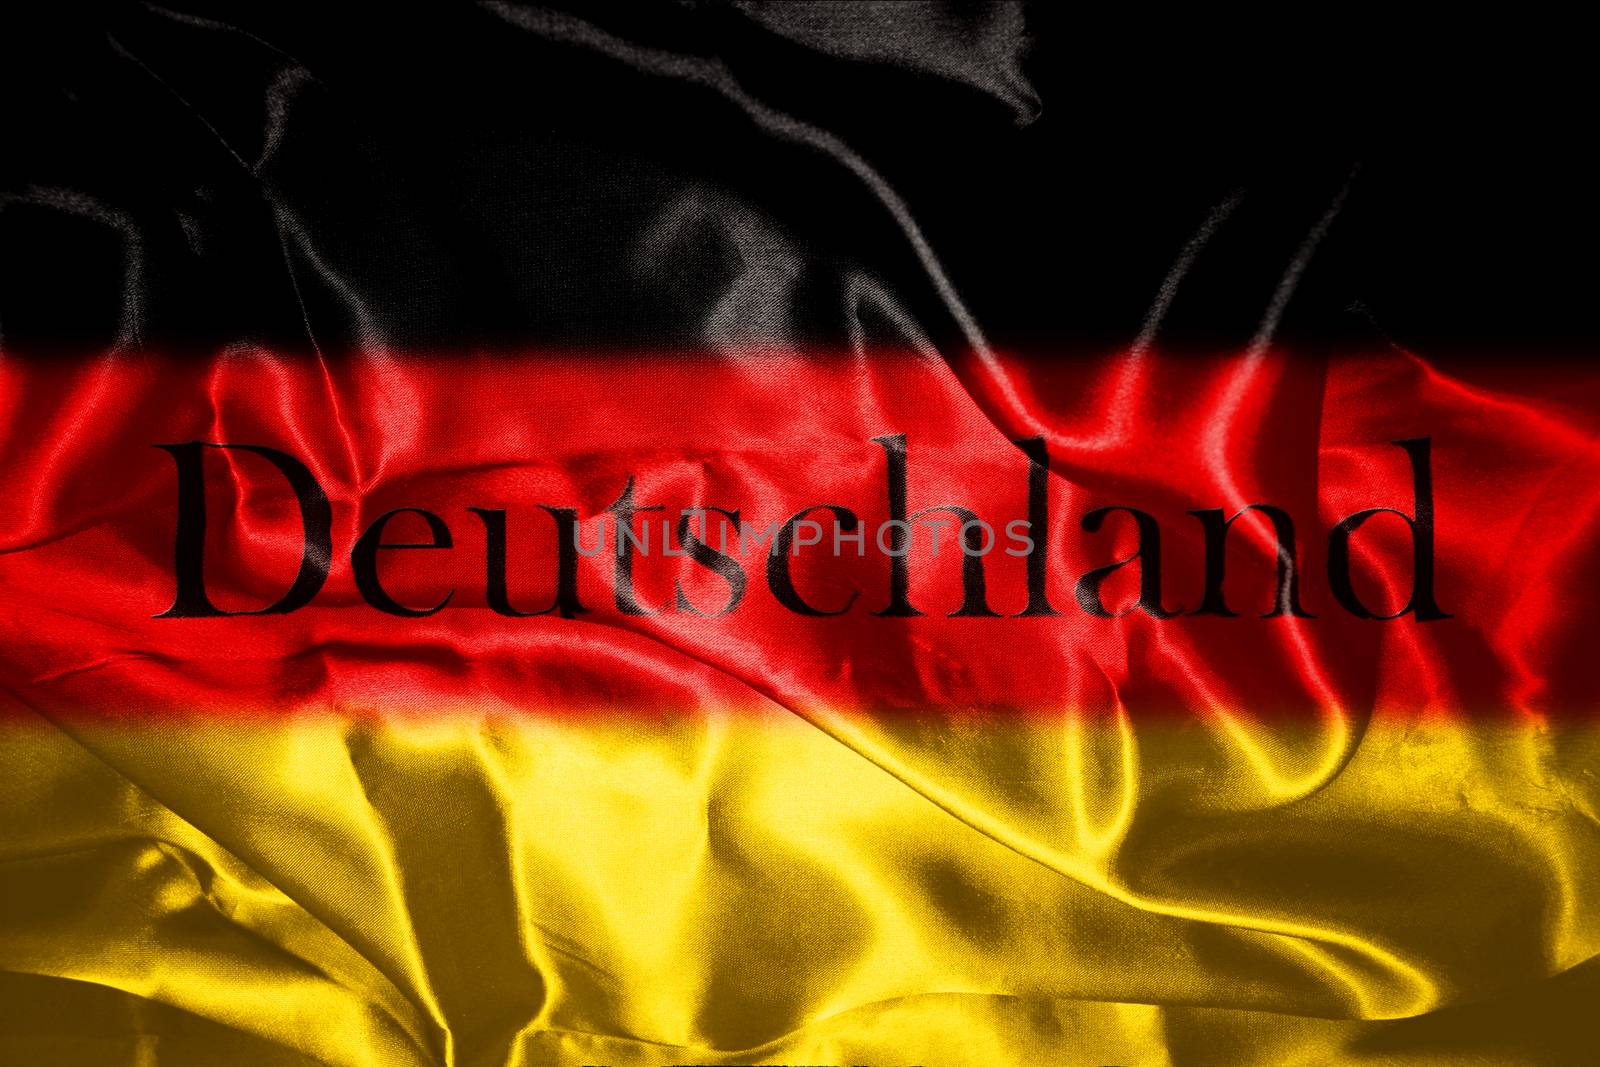 German flag blowing in the wind With Letters That Spell Deutschland Which Means Germany